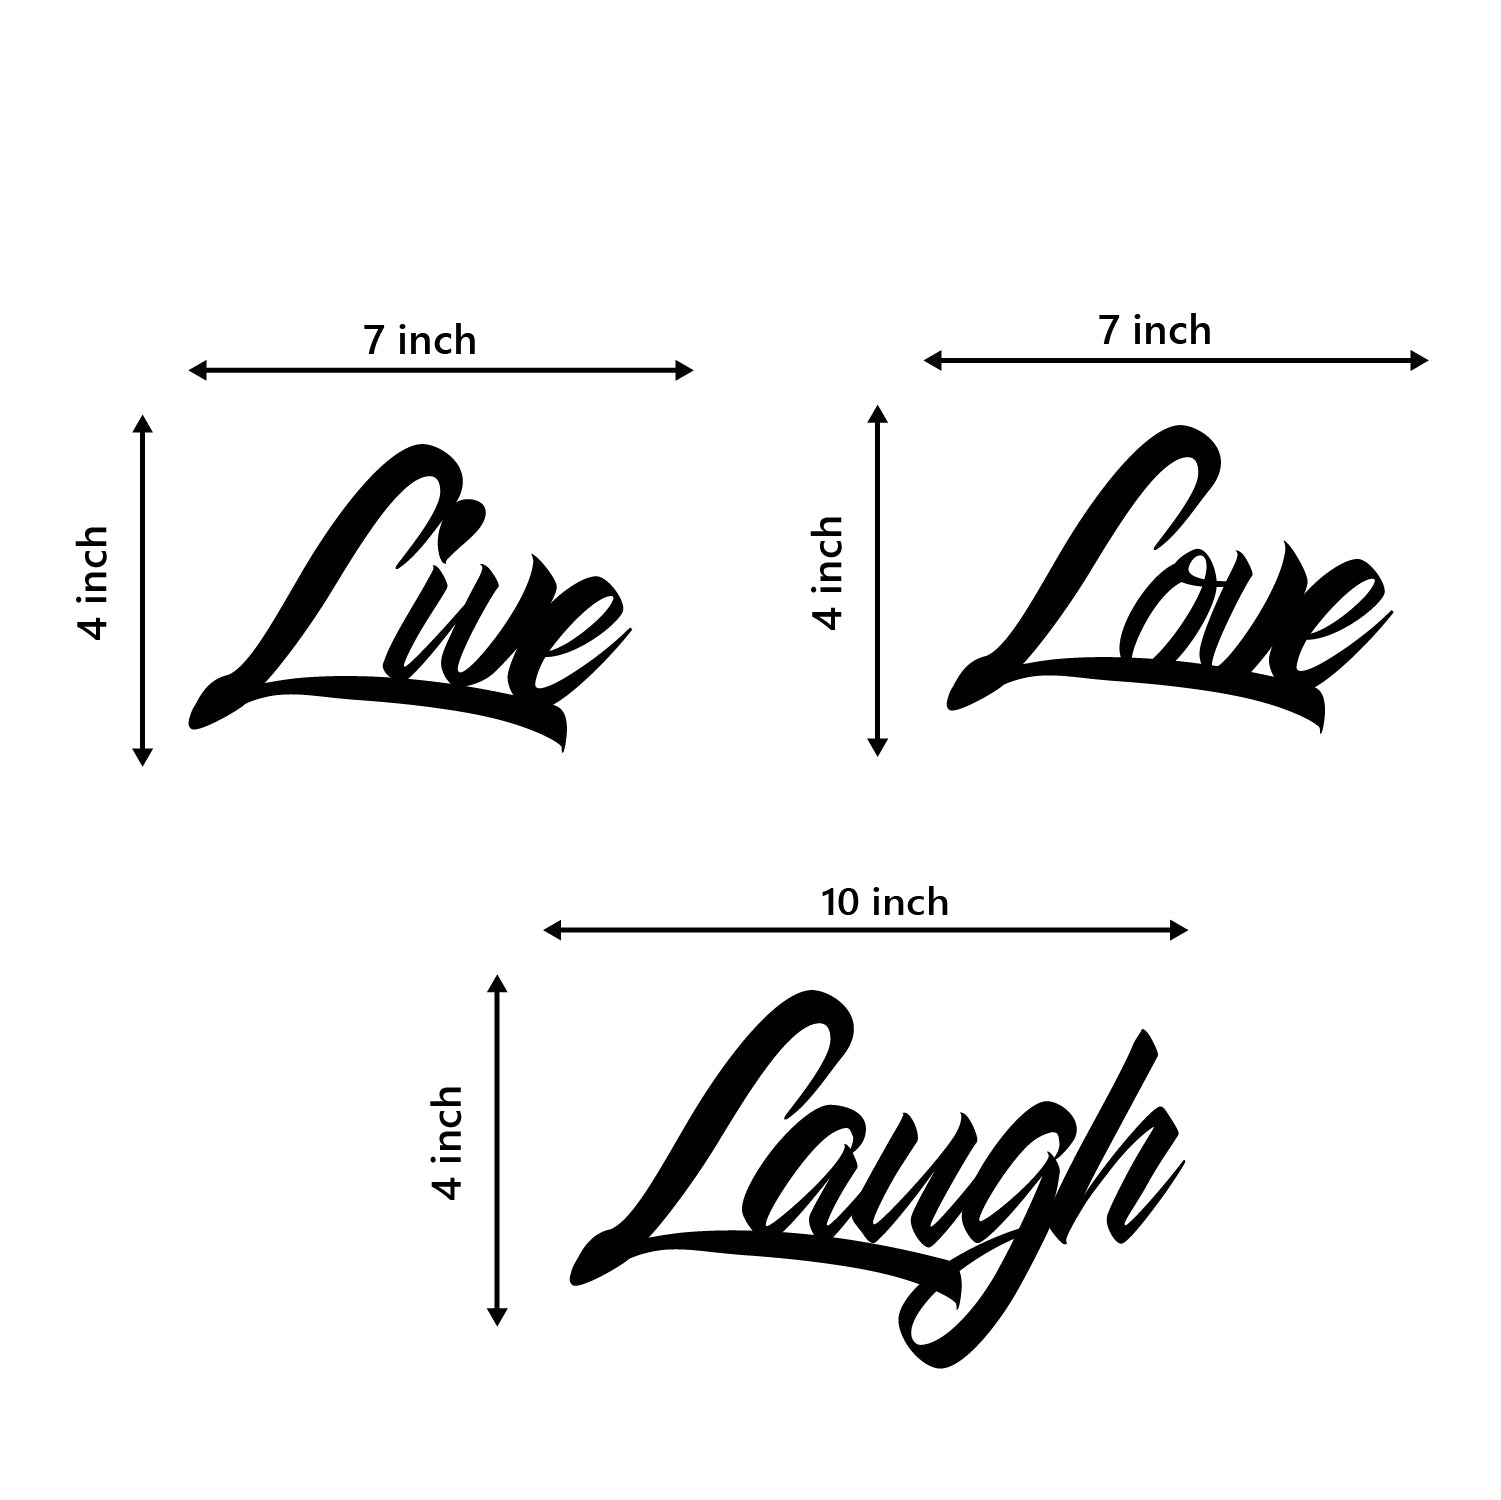 "Live Love Laugh" Black MDF Engineered Wooden Wall Art/Hanging Cutout for Home Decor 2